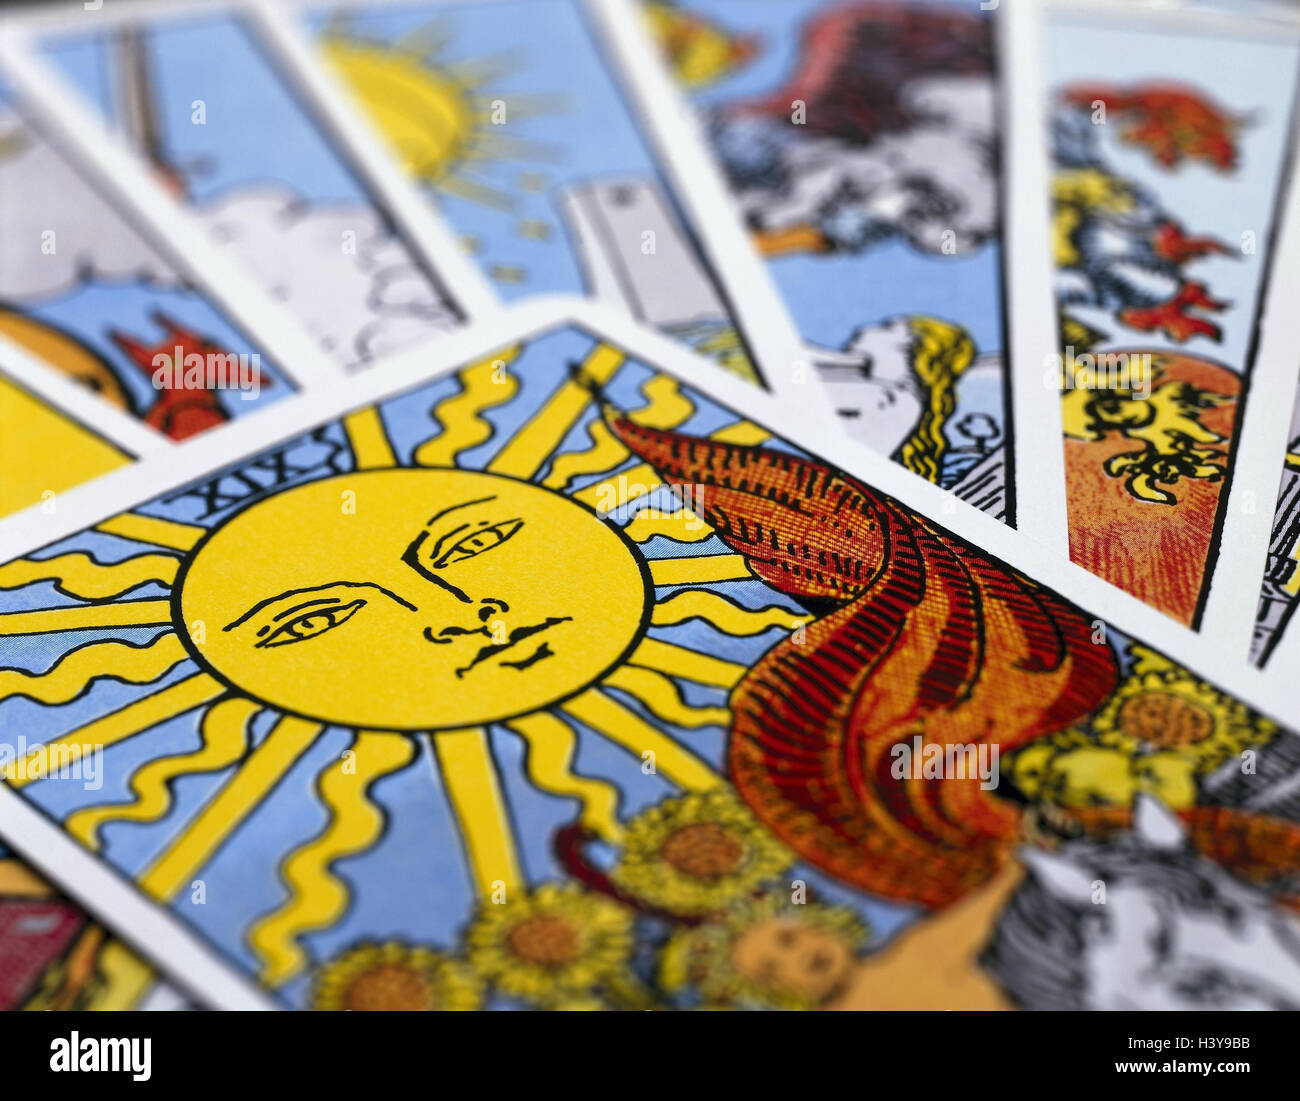 Card game, tarot, Rider Waite, playing cards, about one another, detail, 'The sun' esotericism, spiritualism, nine, tarot cards, tarot card, reading the cards, prediction, prophecy, future, interpretation, playing card, fanned out, Rider Waite tarot Stock Photo